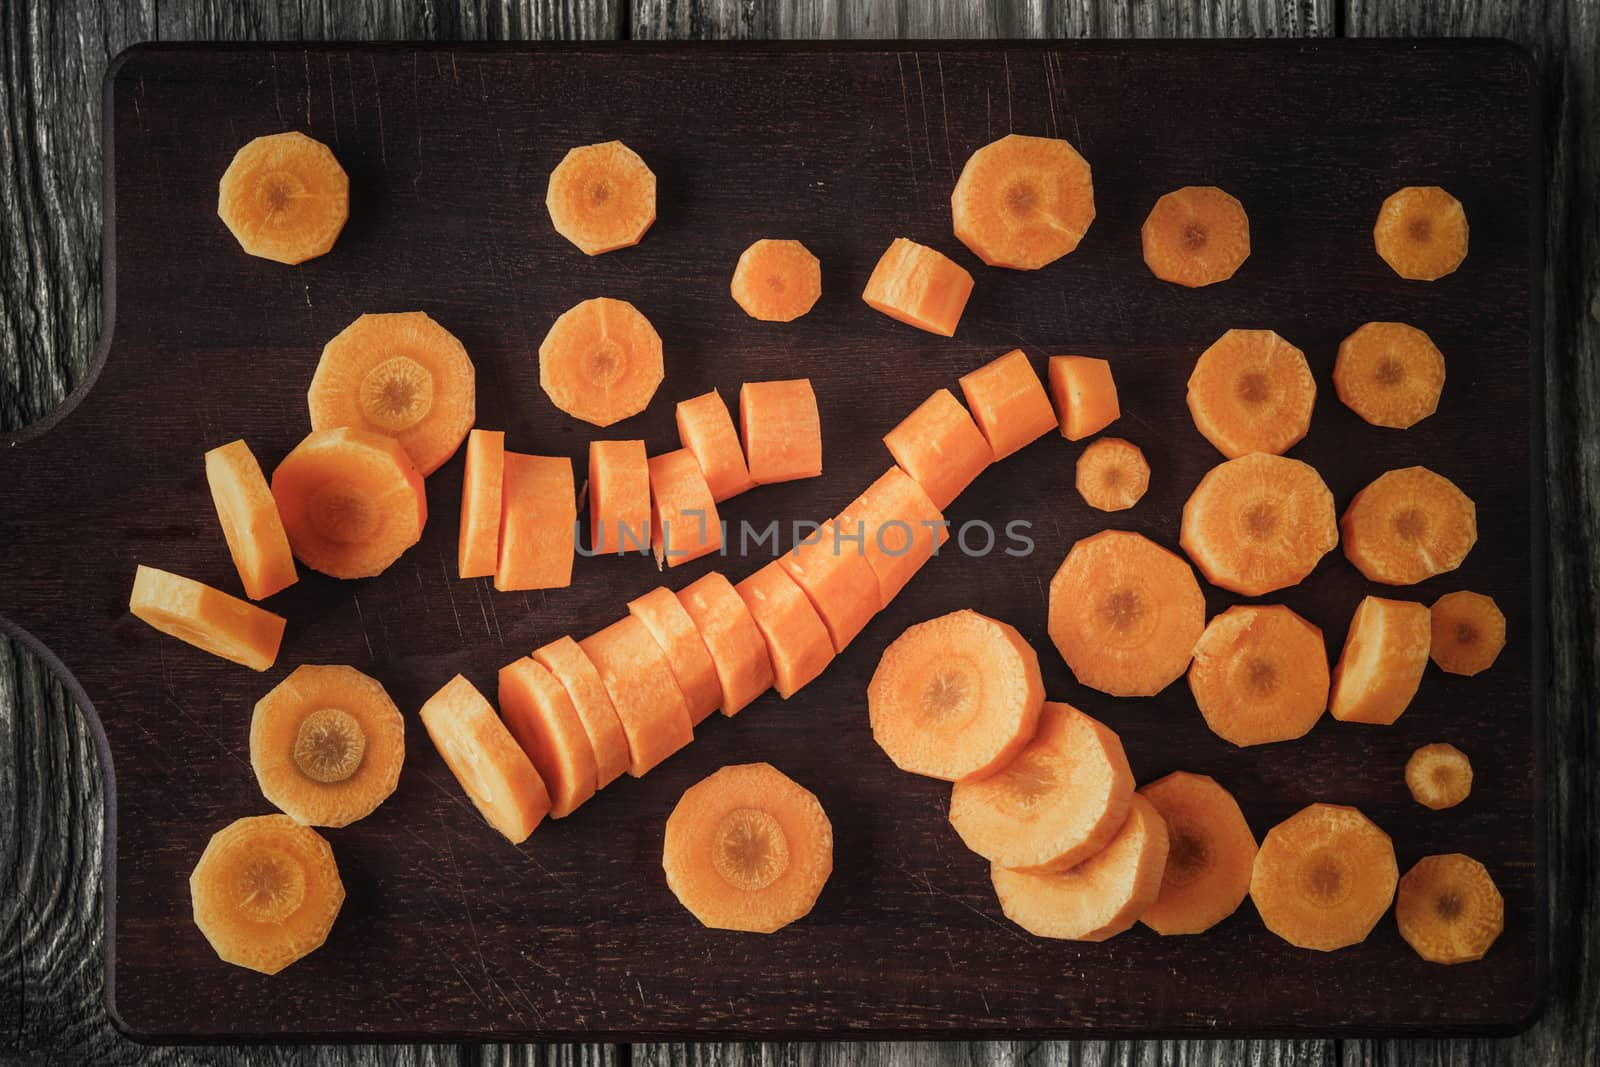 Sliced carrots on the wooden board top view by Deniskarpenkov